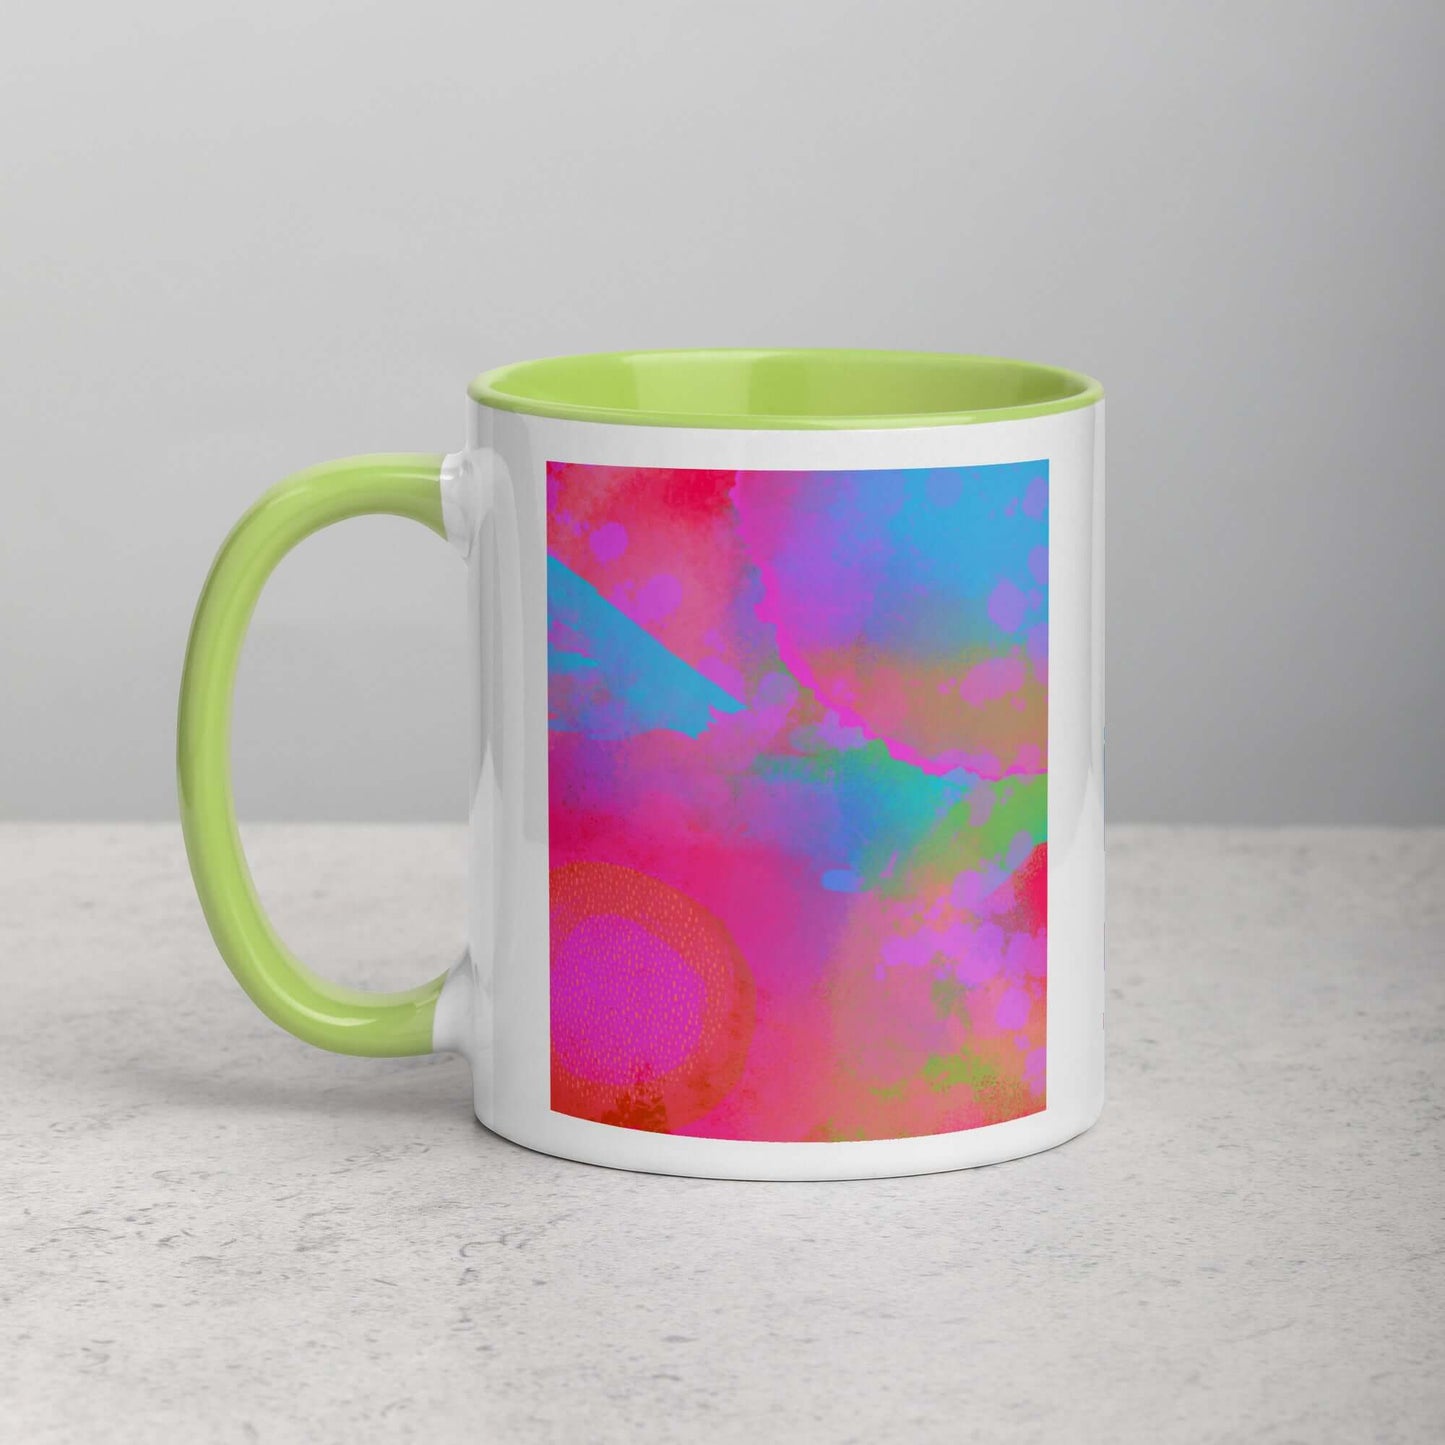 Hot Pink Intergalactic “Between Worlds” Abstract Art Mug with Lime Green Color Inside Left Handed Front View